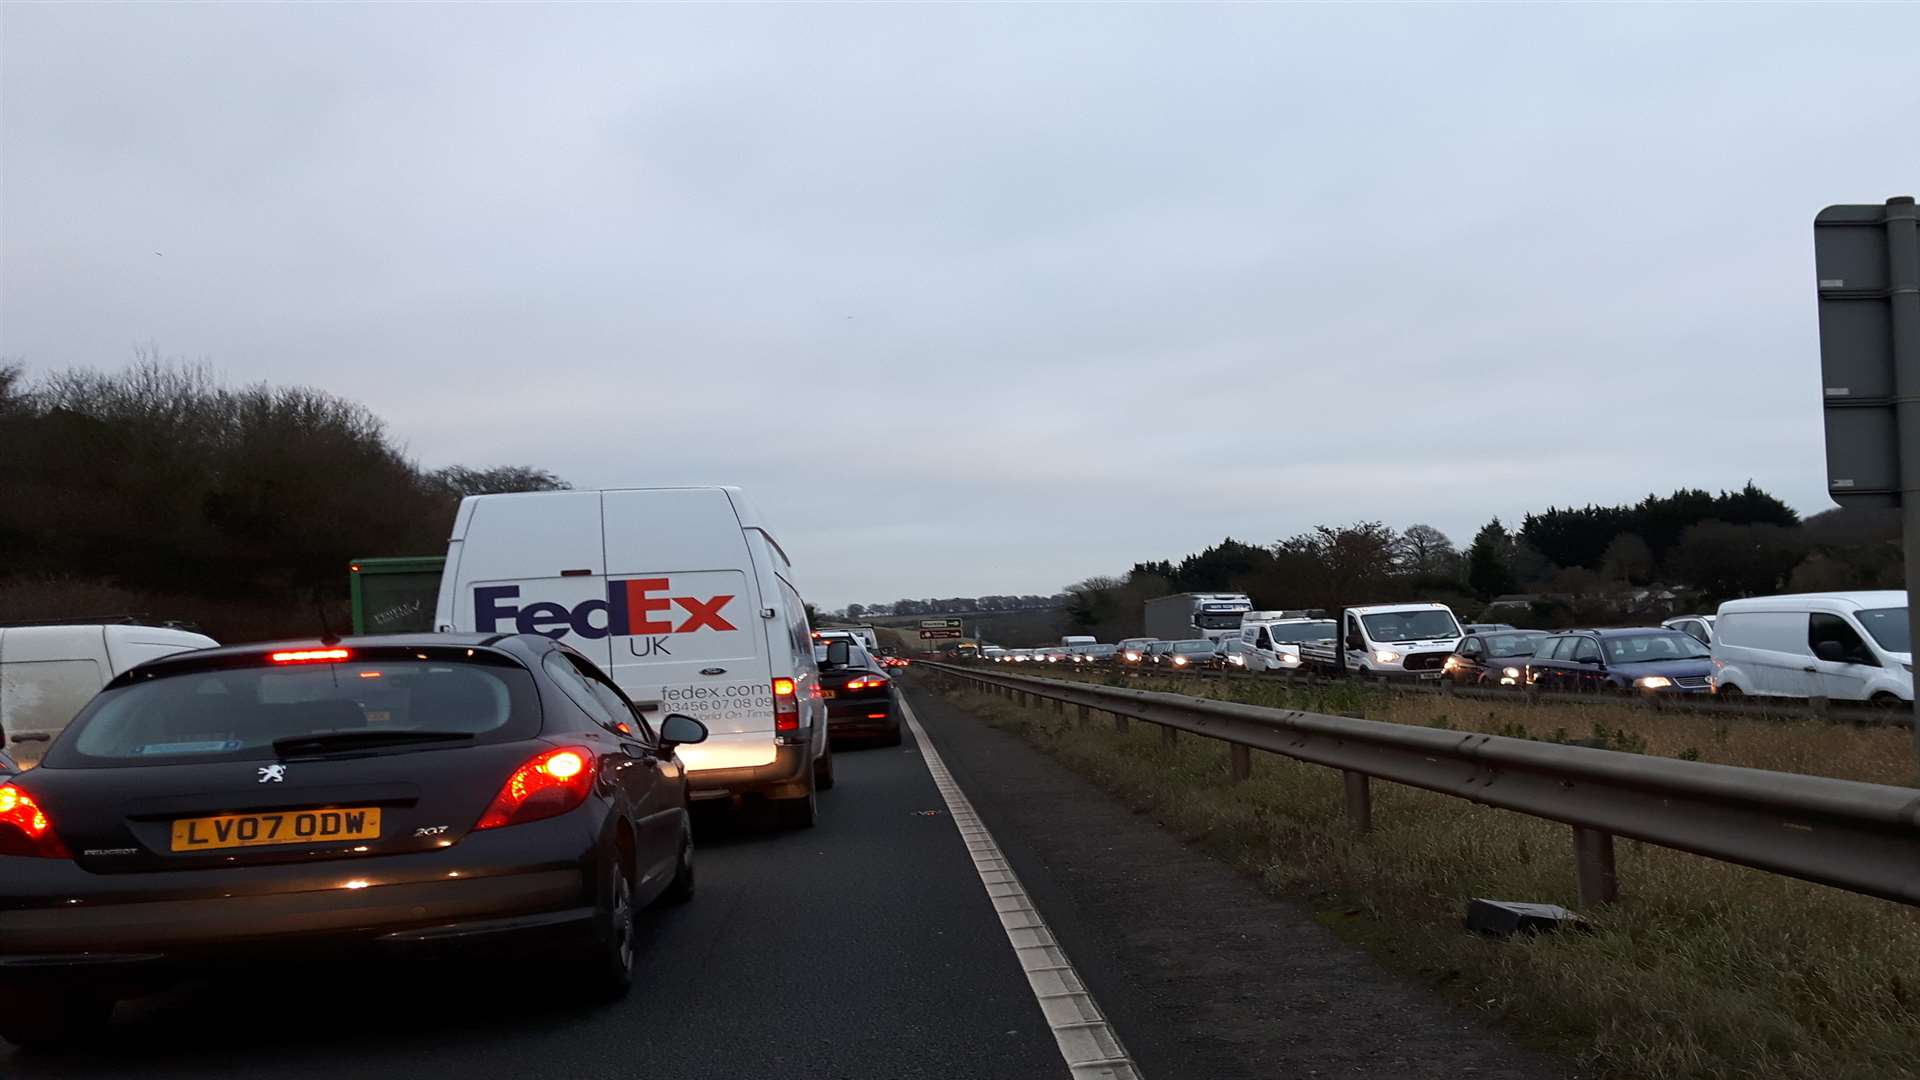 Delays between Sittingbourne and Maidstone today on the A249